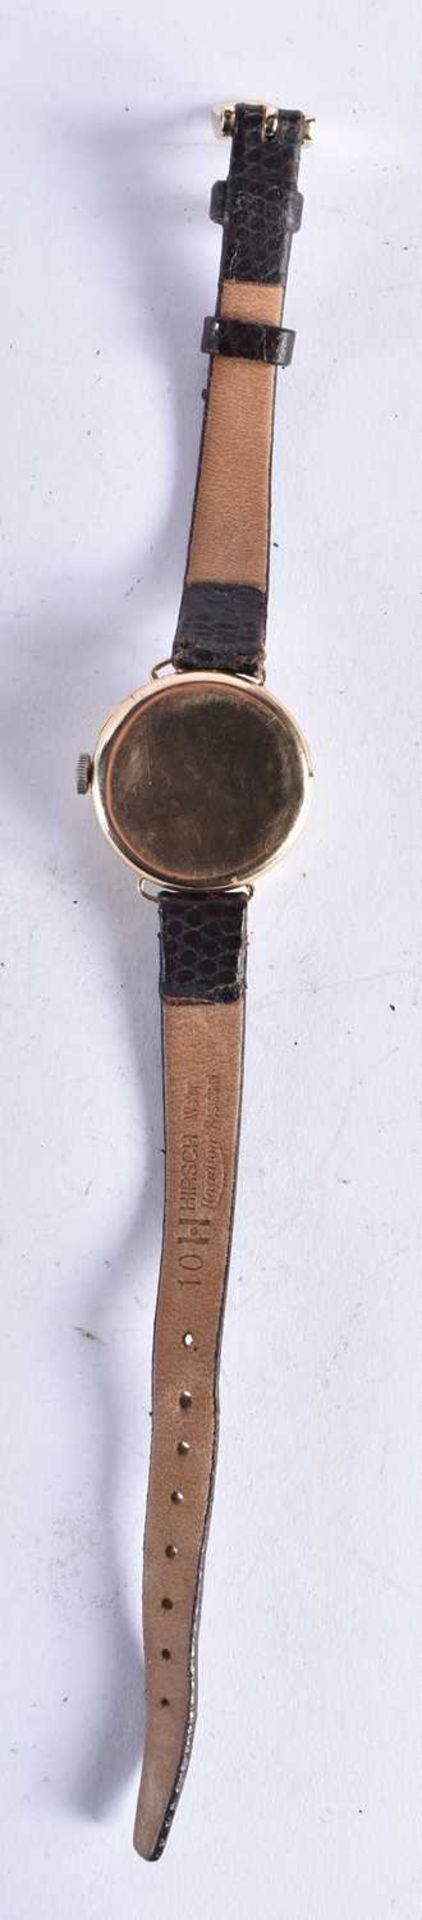 J.W. BENSON 9ct Gold Cased Antique Trench Style Wristwatch Hand-wind Working. 17 grams. 2.75 cm wide - Image 5 of 5